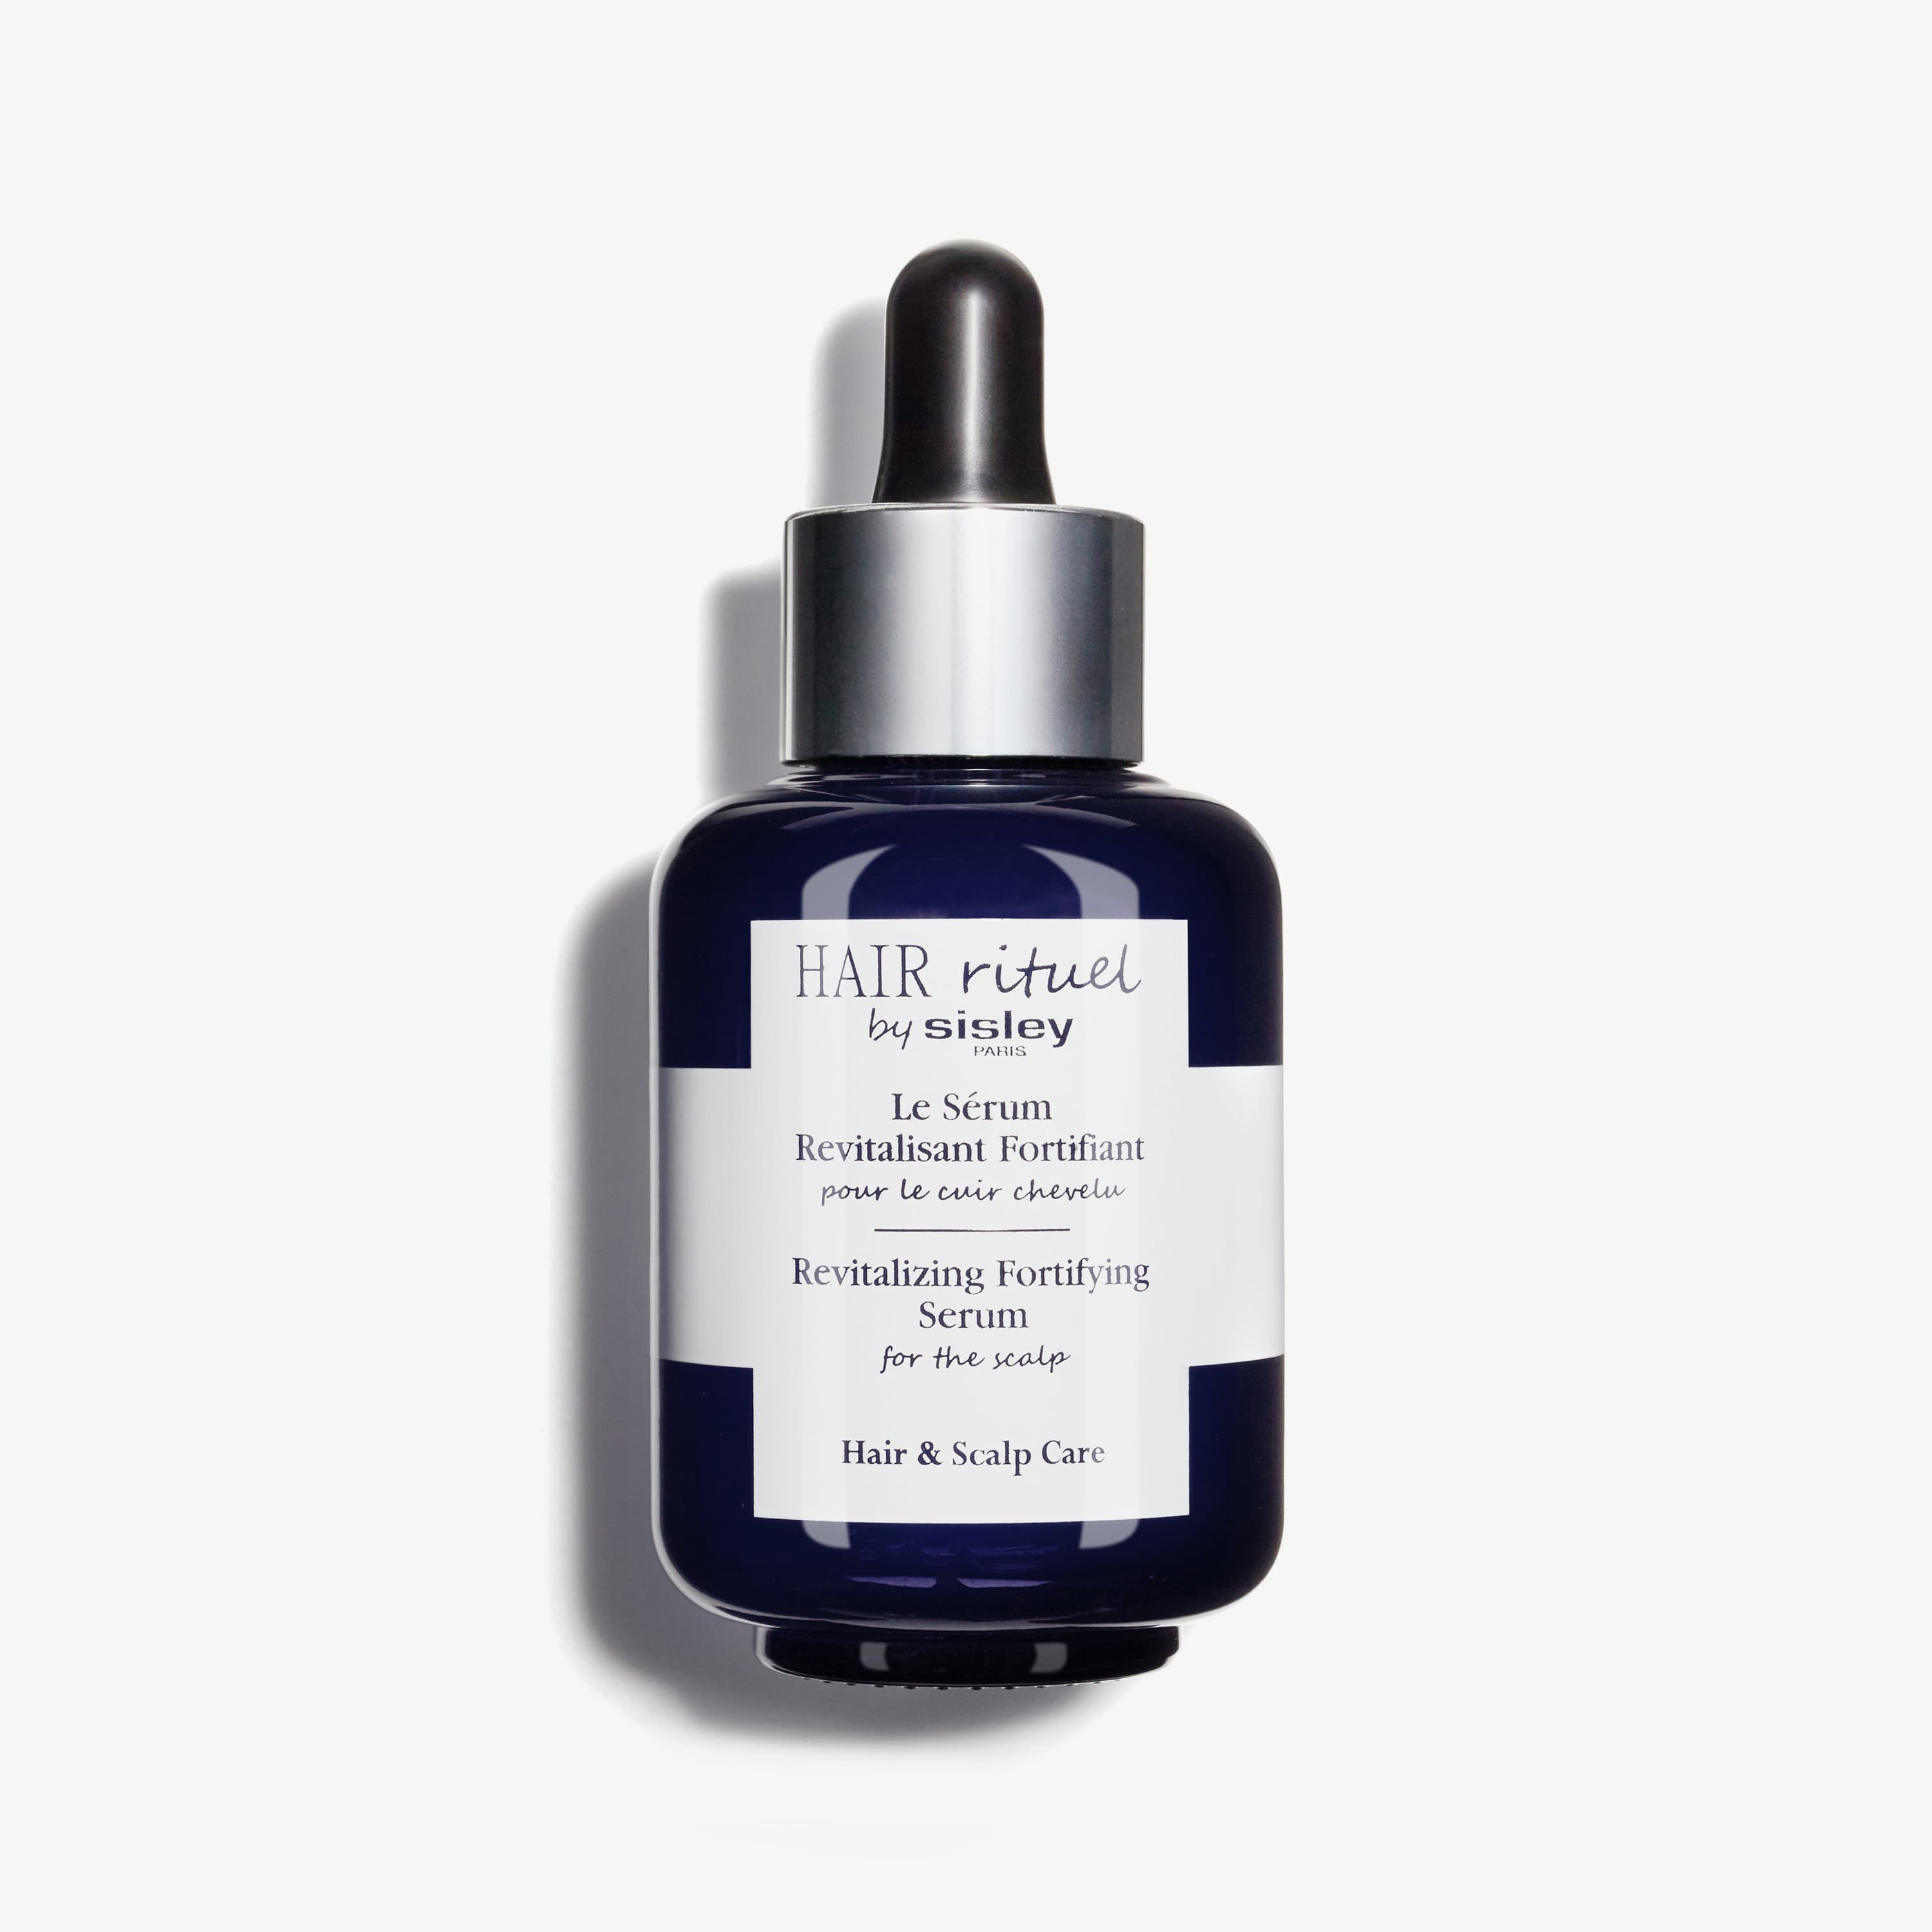 Revitalising Fortifying Serum for the scalp